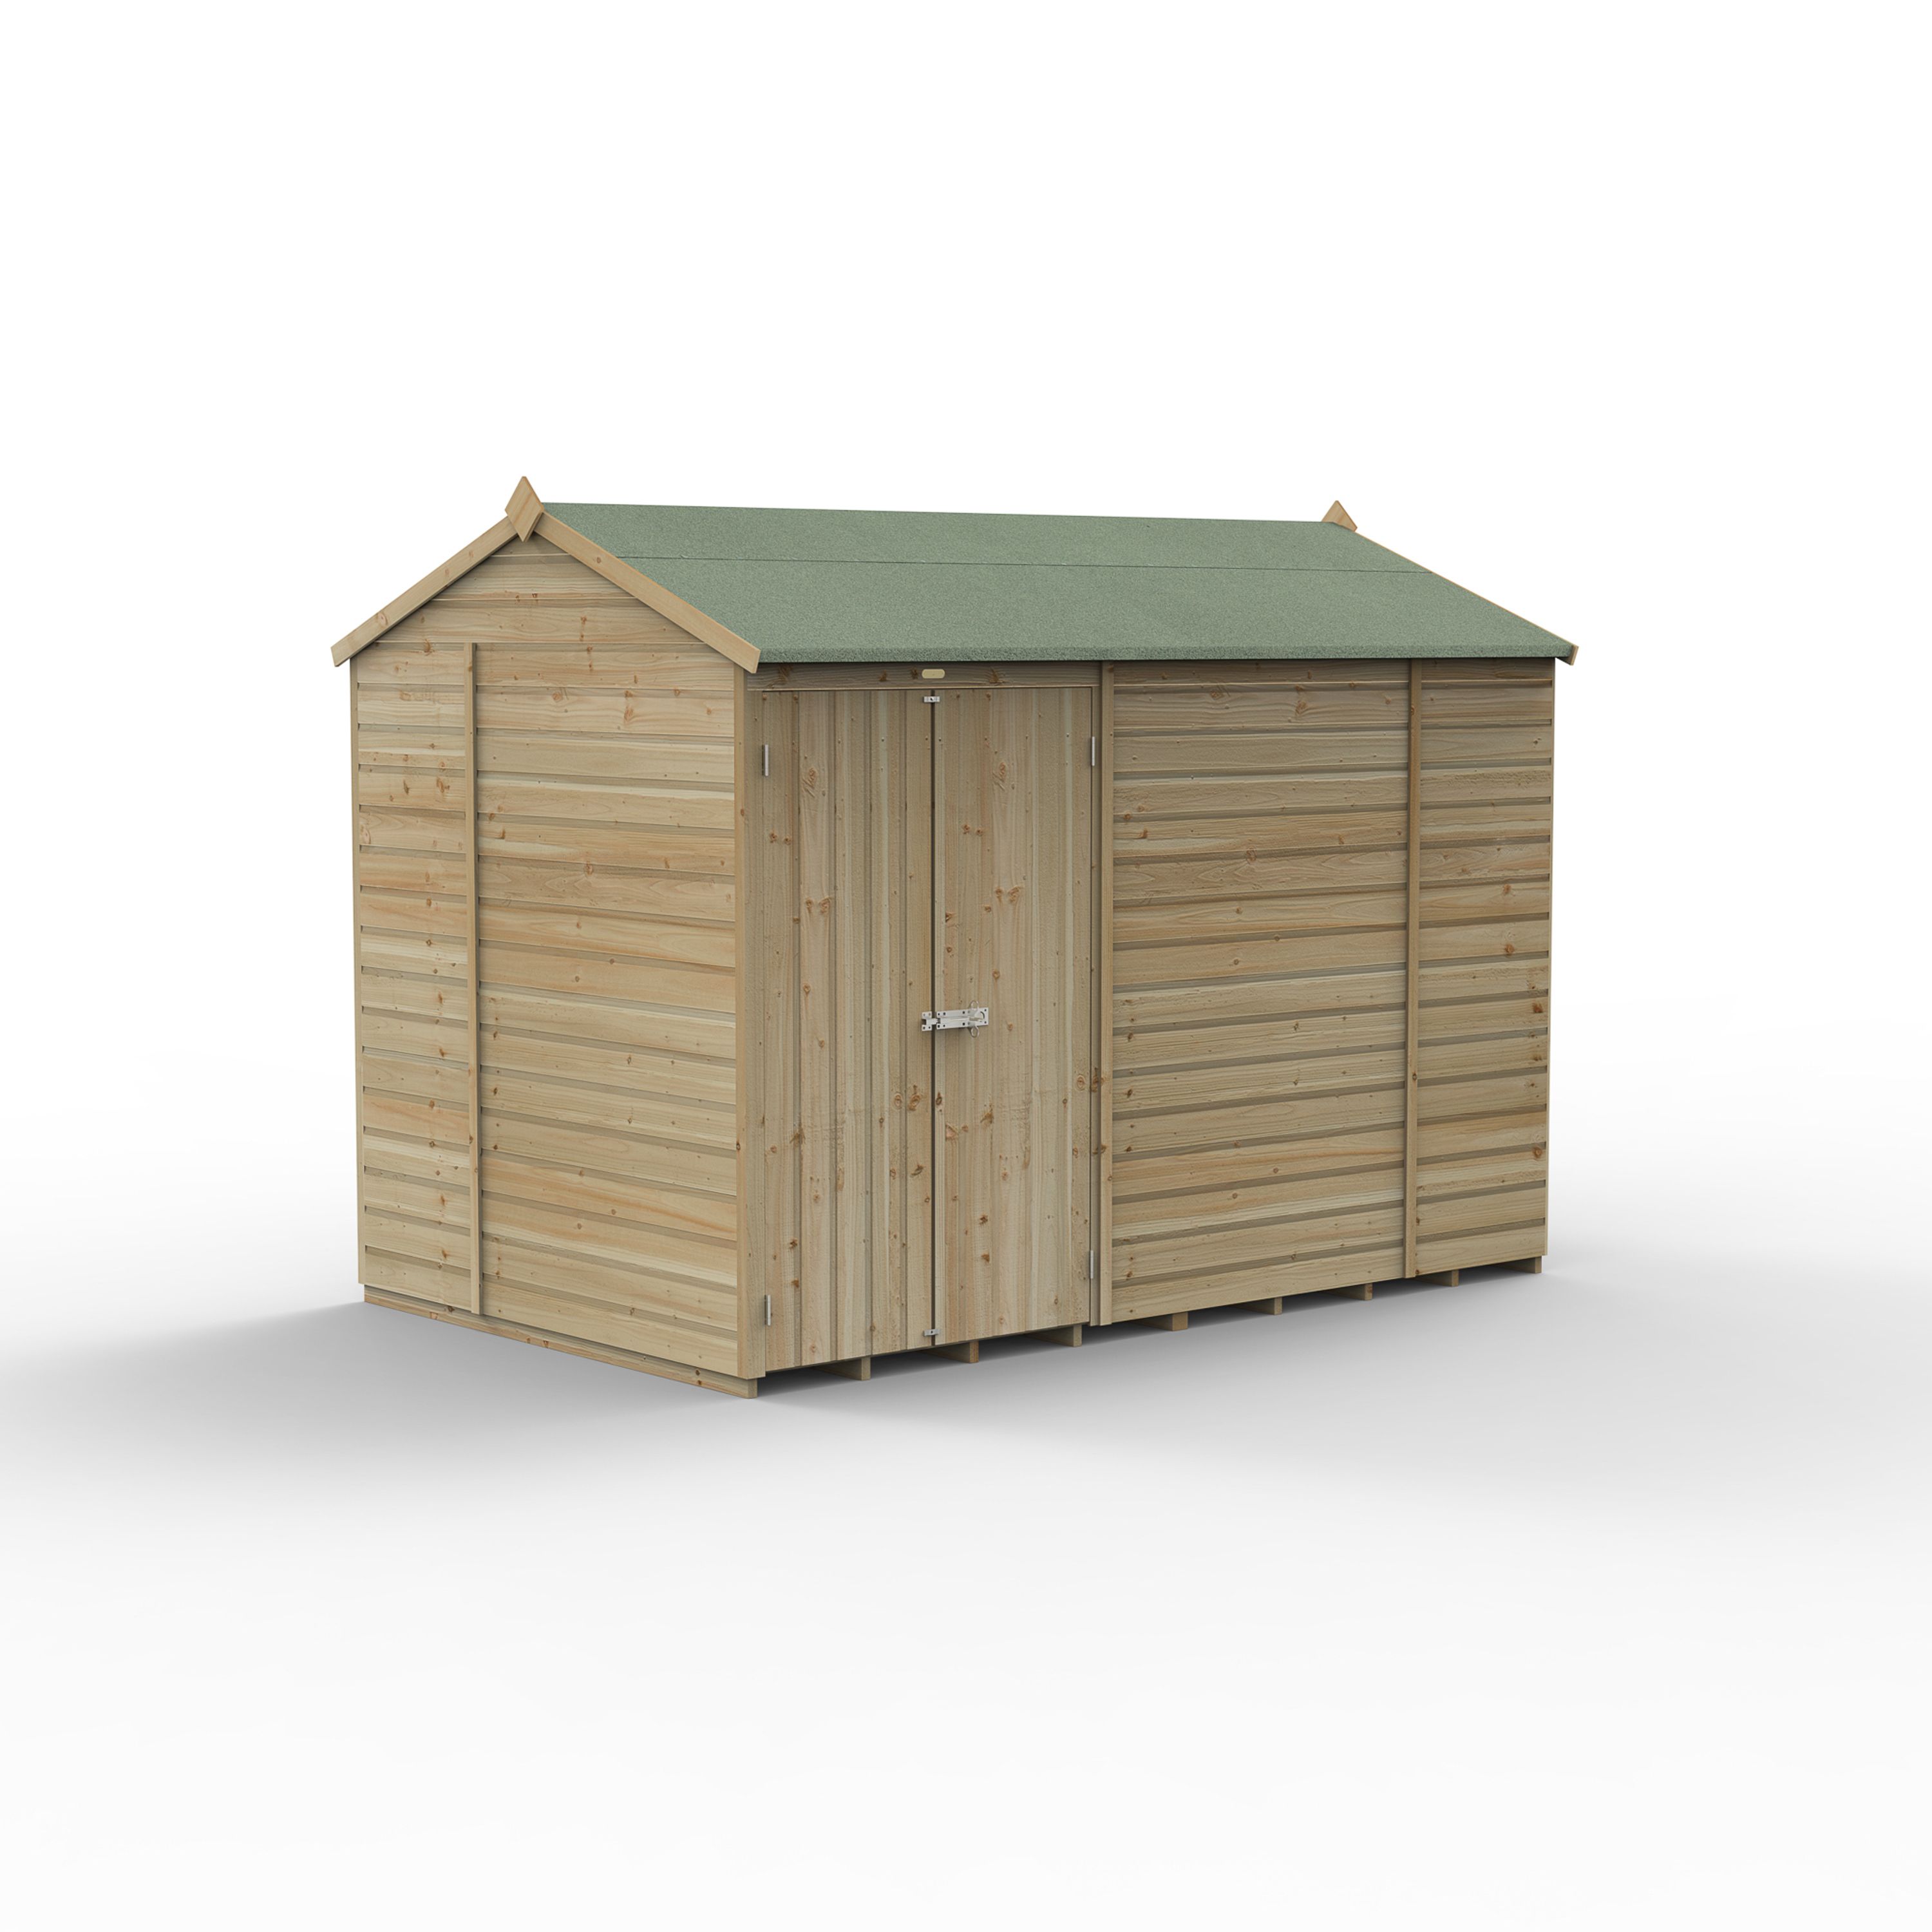 Forest Garden Beckwood 10x6 ft Reverse apex Natural timber Wooden 2 door Shed with floor (Base included) - Assembly not required